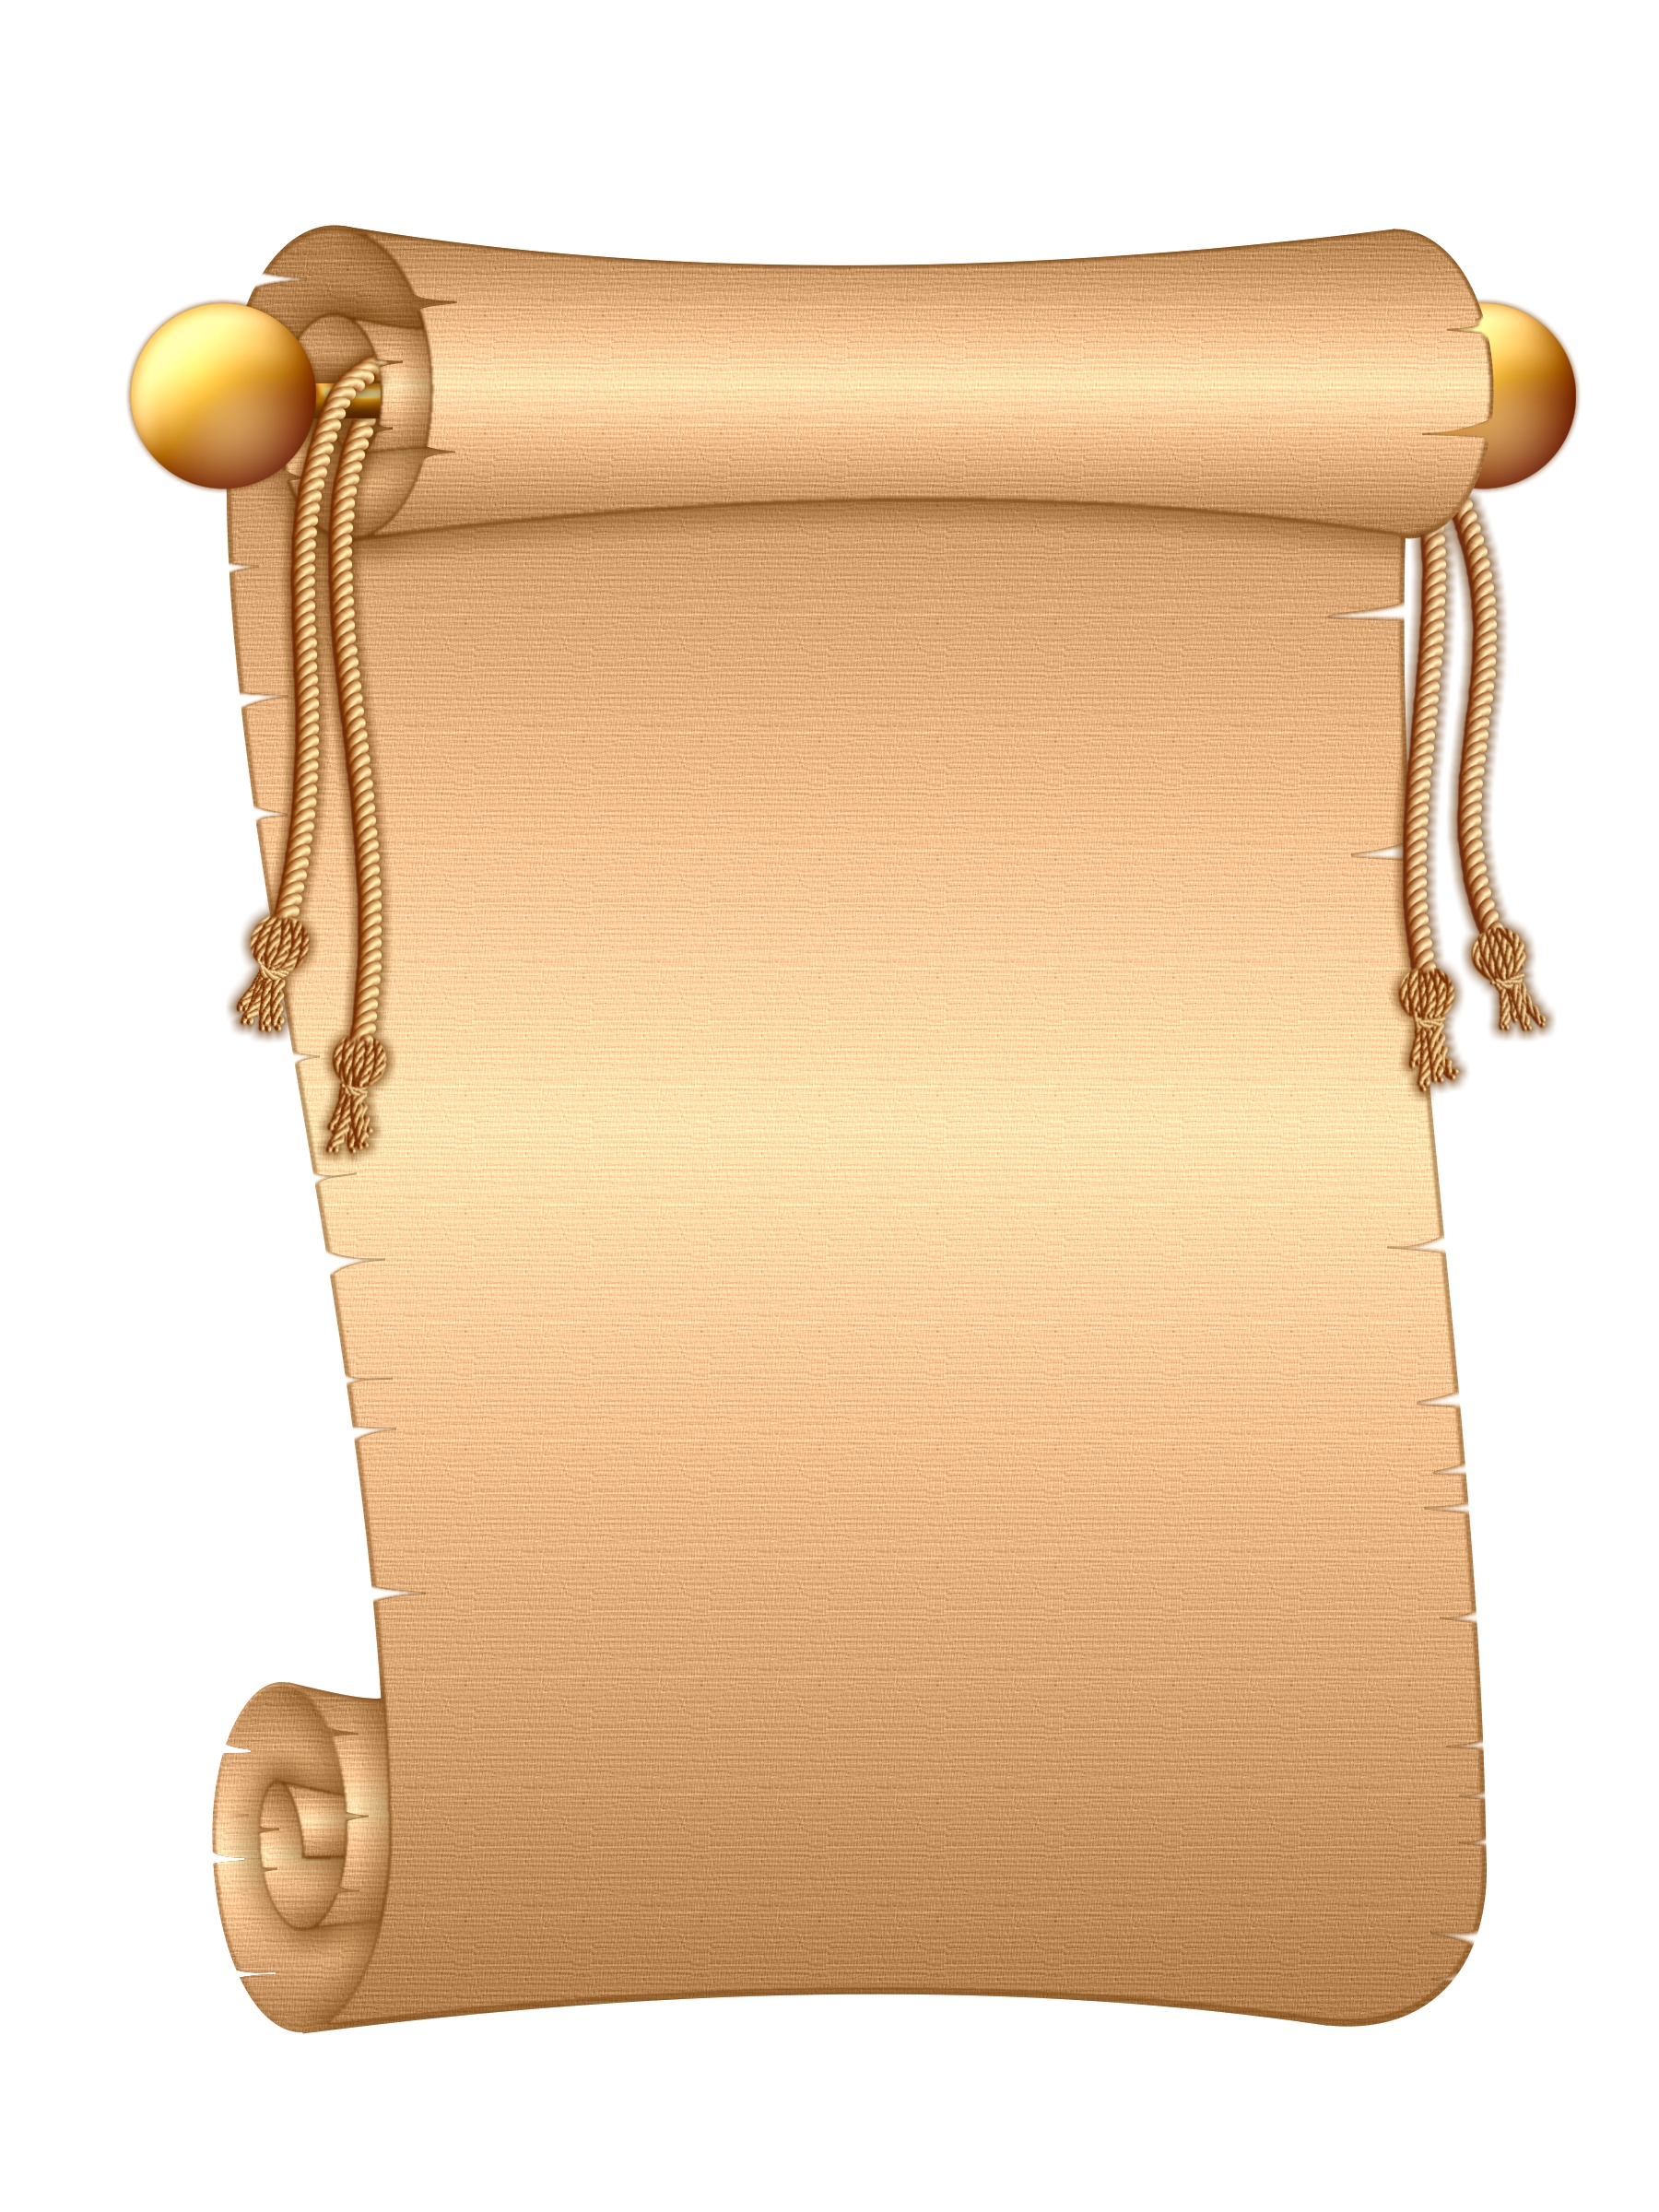 scroll clipart old fashioned clipart, transparent - 2221.82Kb 1800x2400.